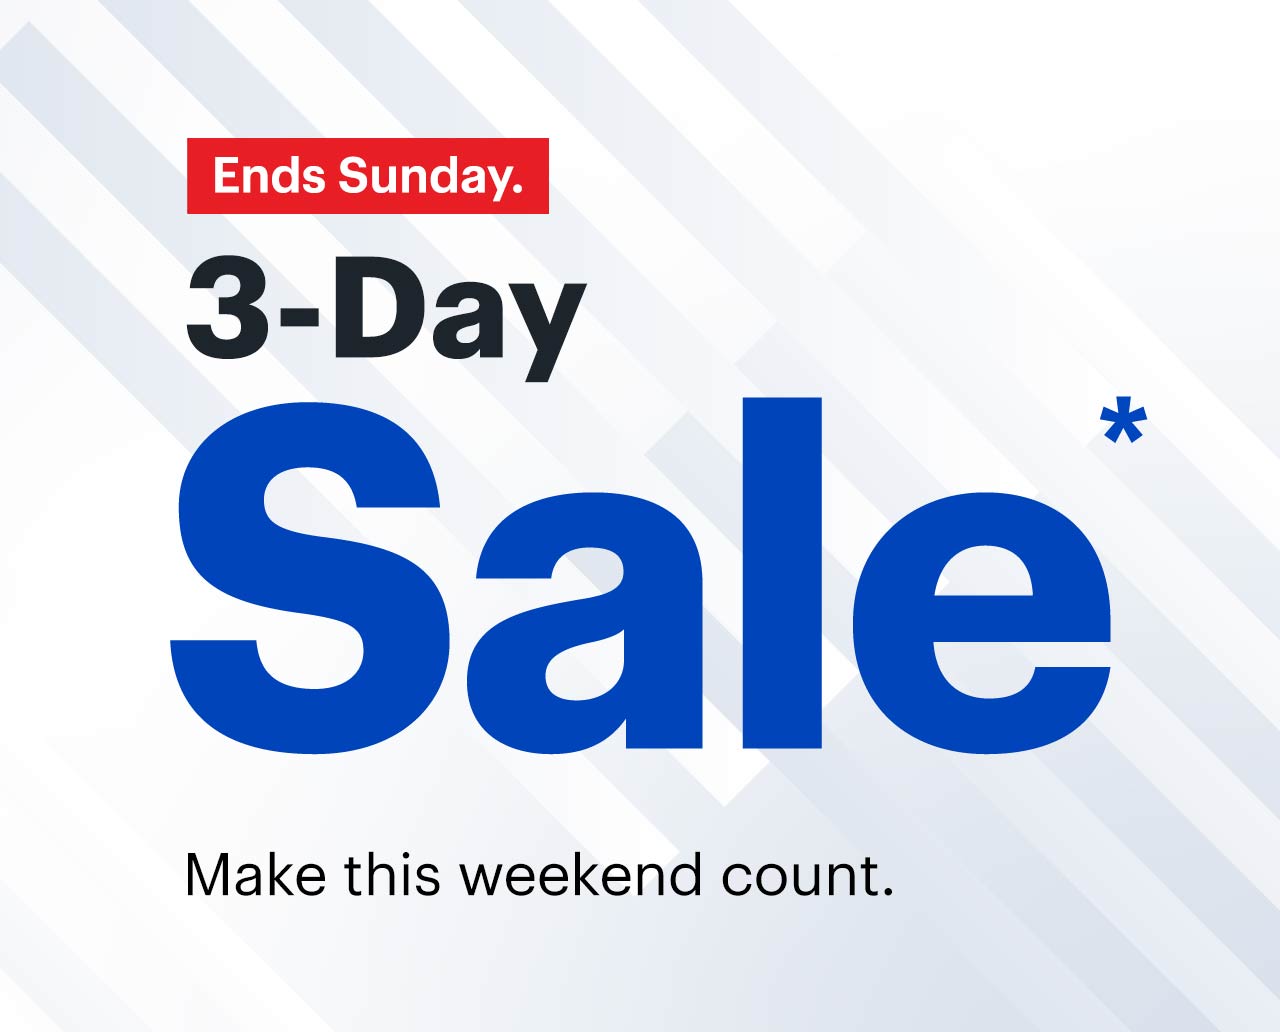 3-Day Sale. Make this weekend count. Ends Sunday. Reference disclaimer.